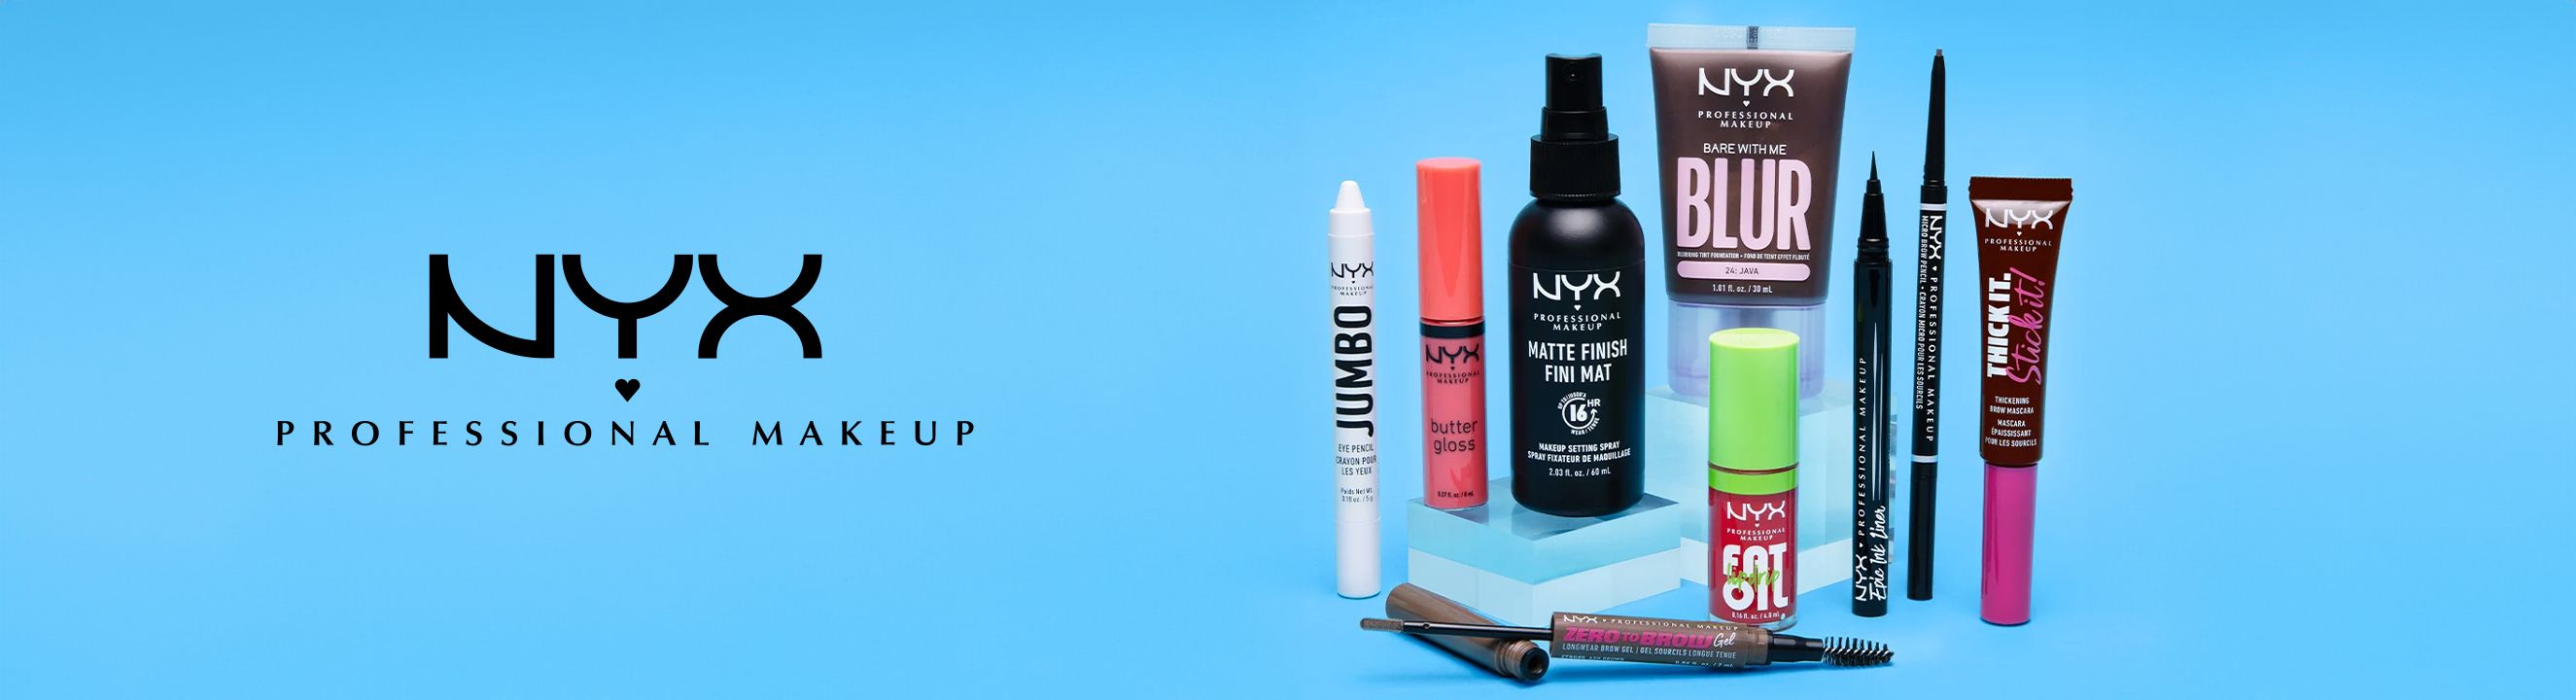 nyx-professional-makeup-collection